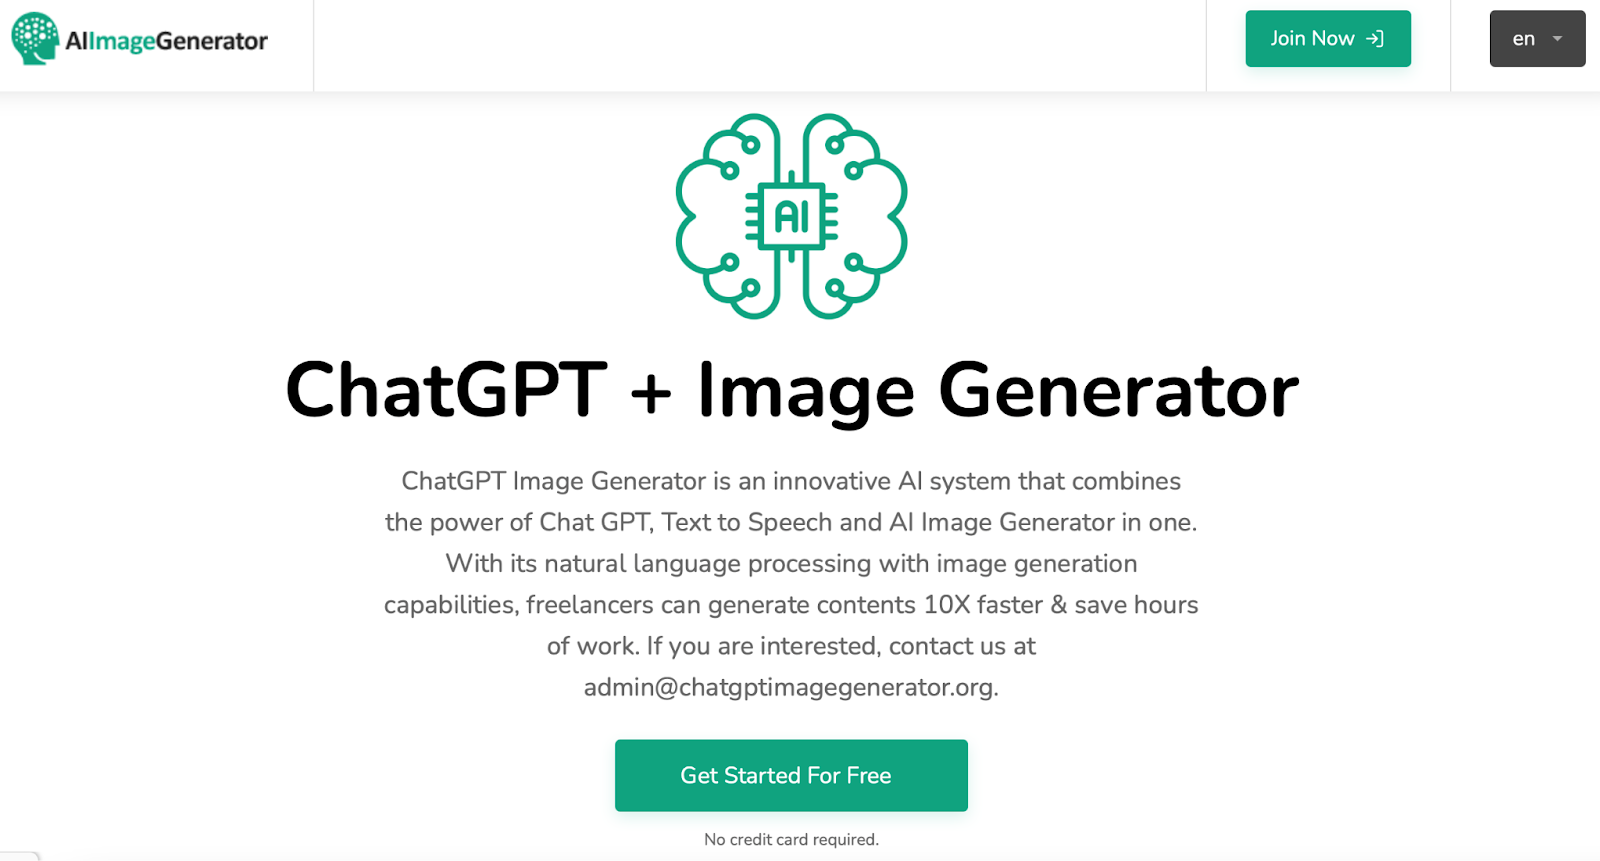 How ChatGPT and Social Media Can Work Together